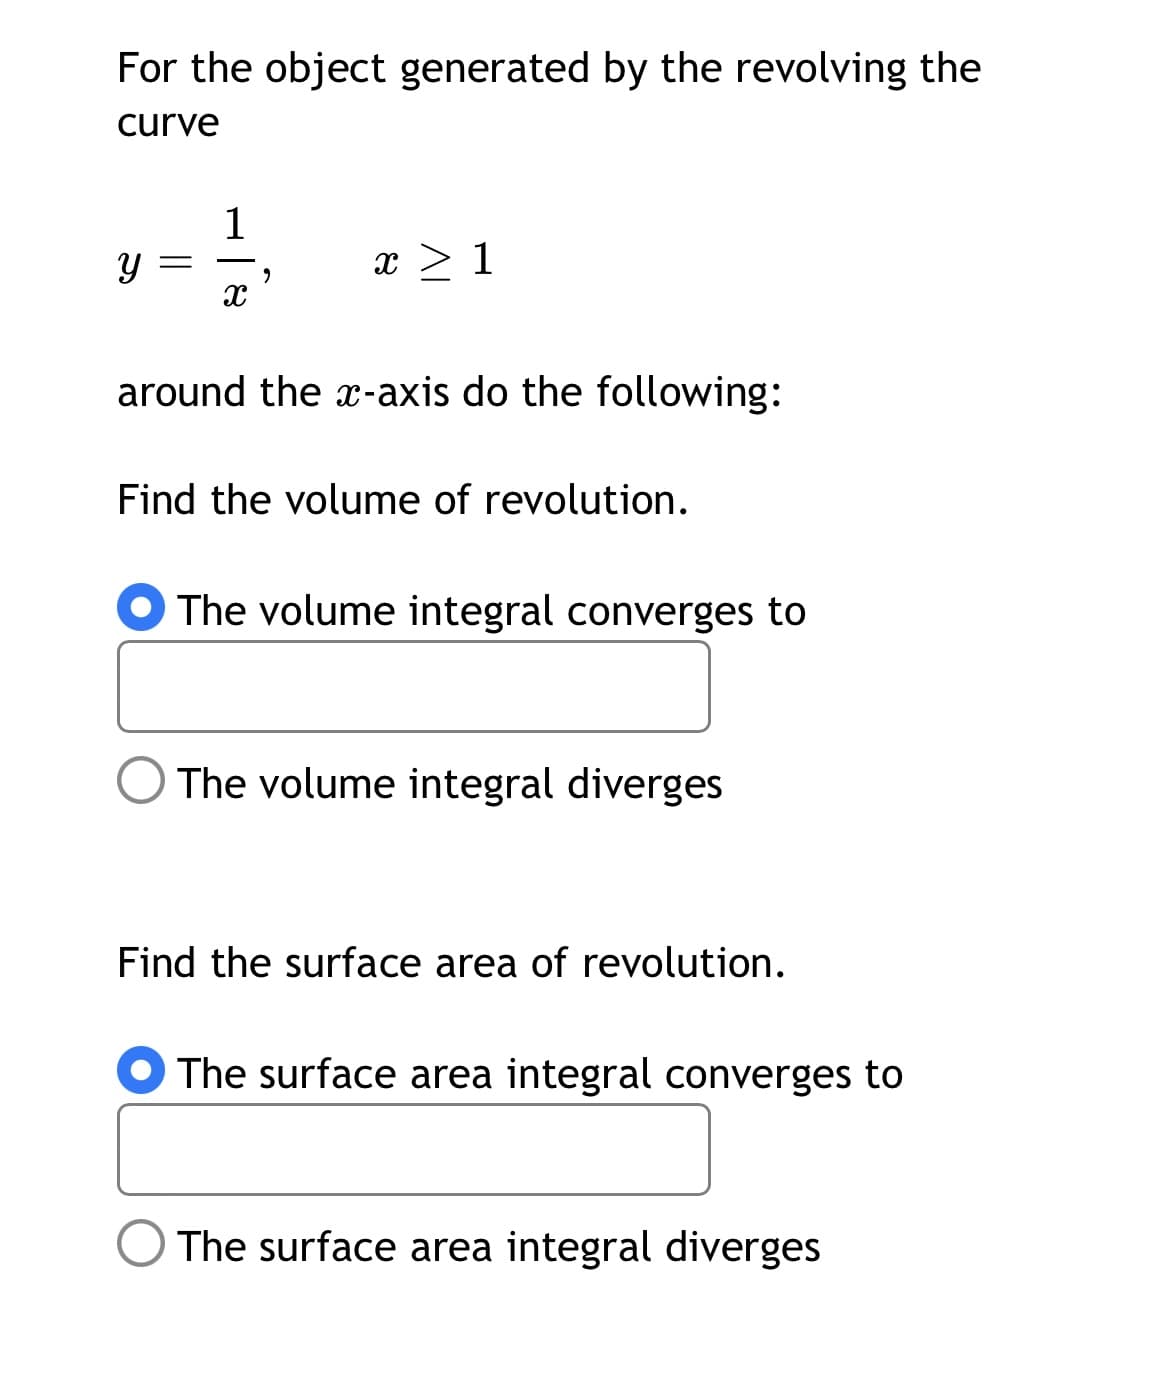 For the object generated by the revolving the
curve
1
x > 1
around the x-axis do the following:
Find the volume of revolution.
O The volume integral converges to
The volume integral diverges
Find the surface area of revolution.
The surface area integral converges to
The surface area integral diverges
